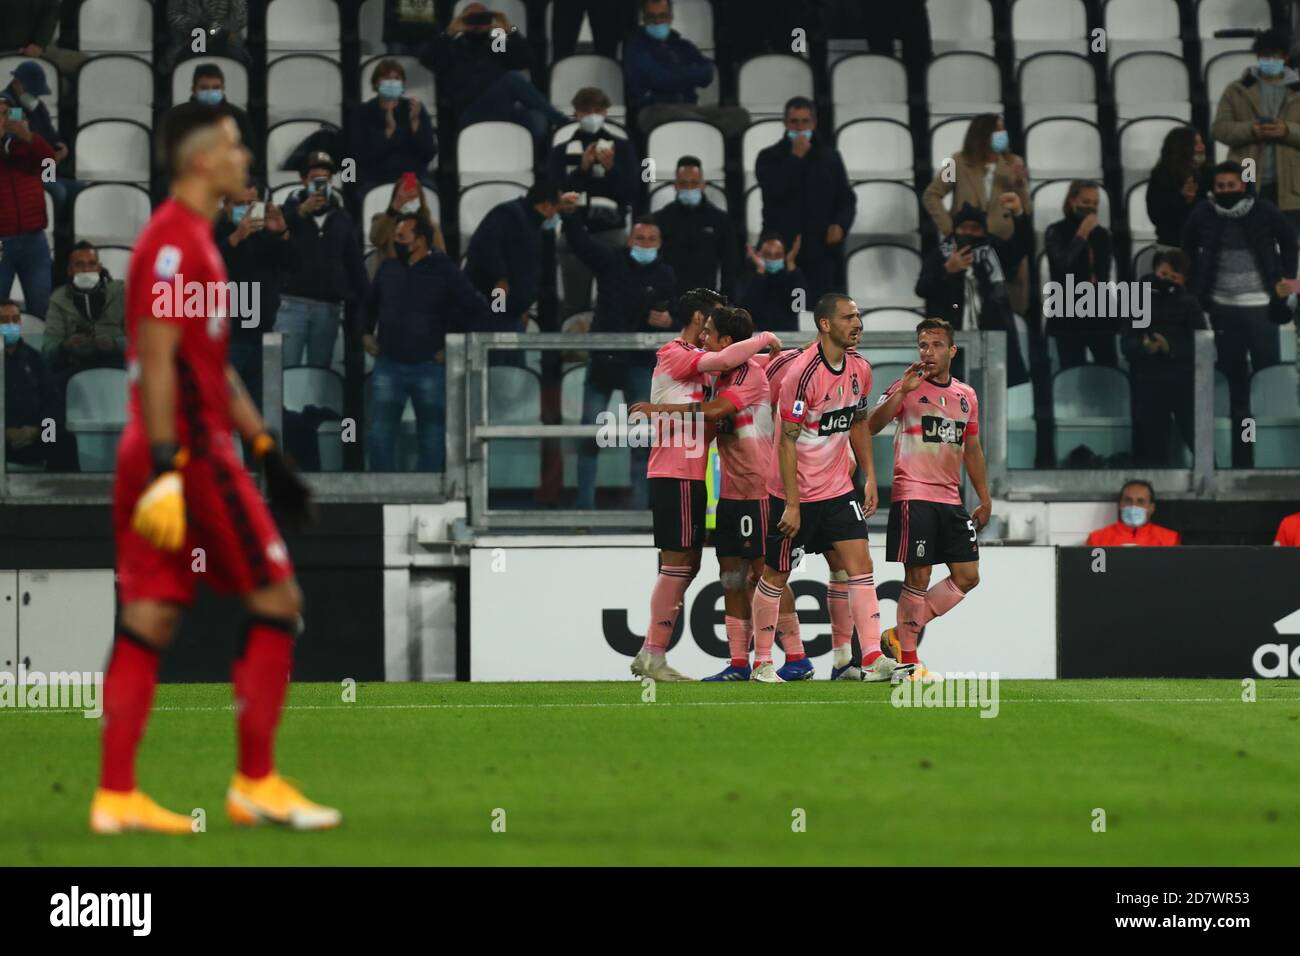 Allianz Stadium, turin, Italy, 25 Oct 2020, Team Juventus Fc during Juventus FC vs Hellas Verona FC, Italian soccer Serie A match - Credit: LM/Alessio Morgese/Alamy Live News Stock Photo